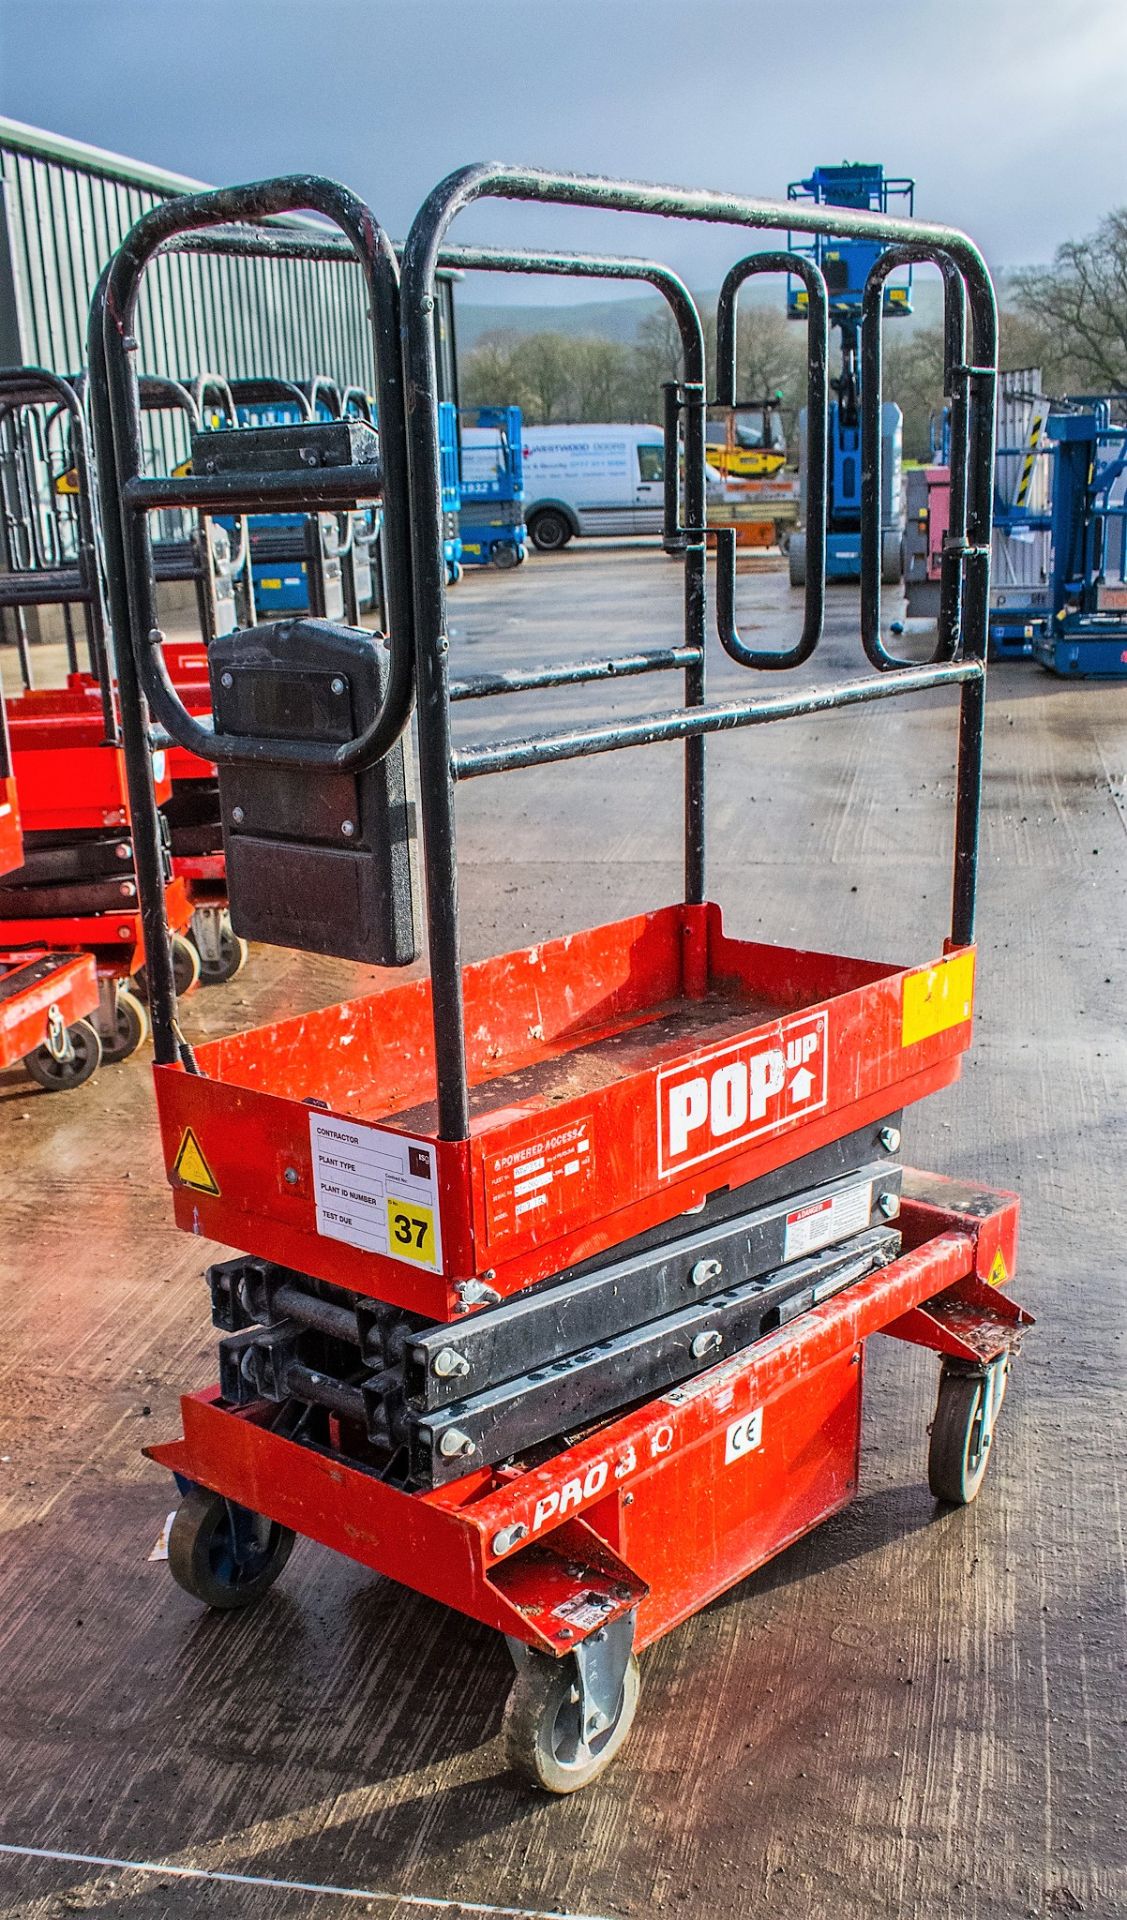 Pop-up PRO 8 iQ battery electric push around scissor lift  Year: 2016 S/N: 01-000924 A740386 - Image 2 of 6